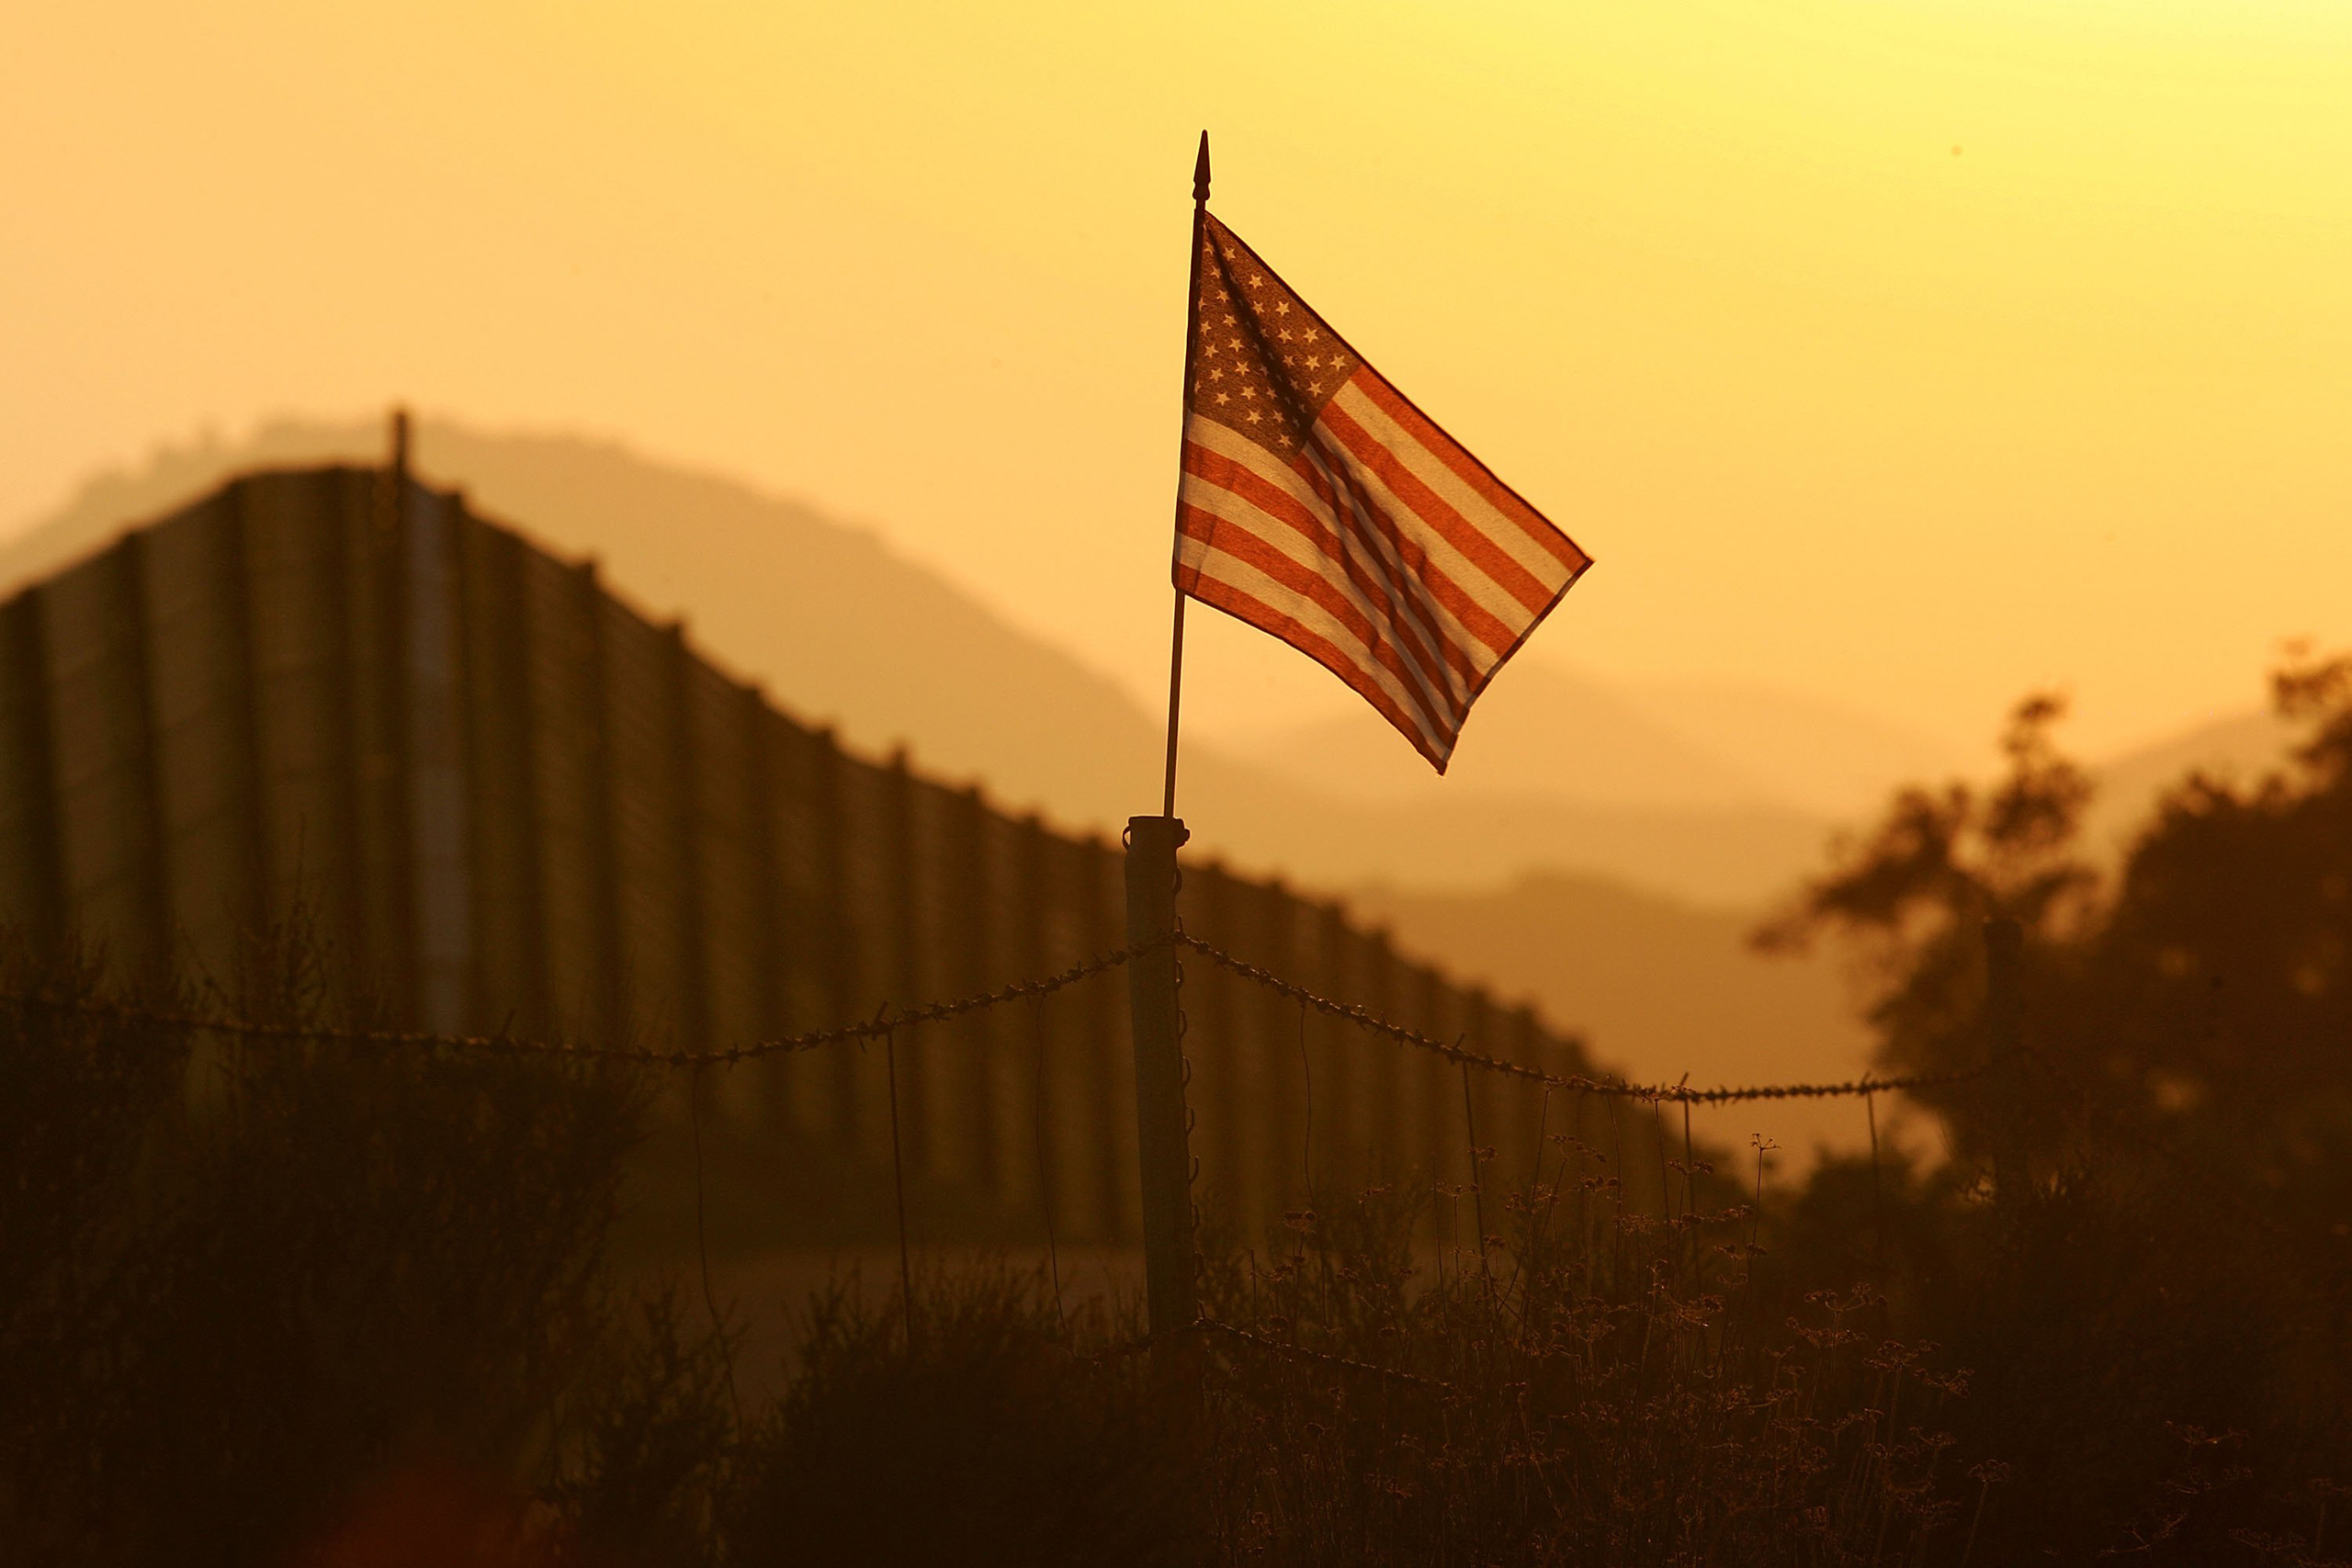 A U.S. flag put up by activists who oppose illegal immigration flies near the US-Mexico border fence near Campo, California, on Oct. 8, 2006. (David McNew—Getty Images)